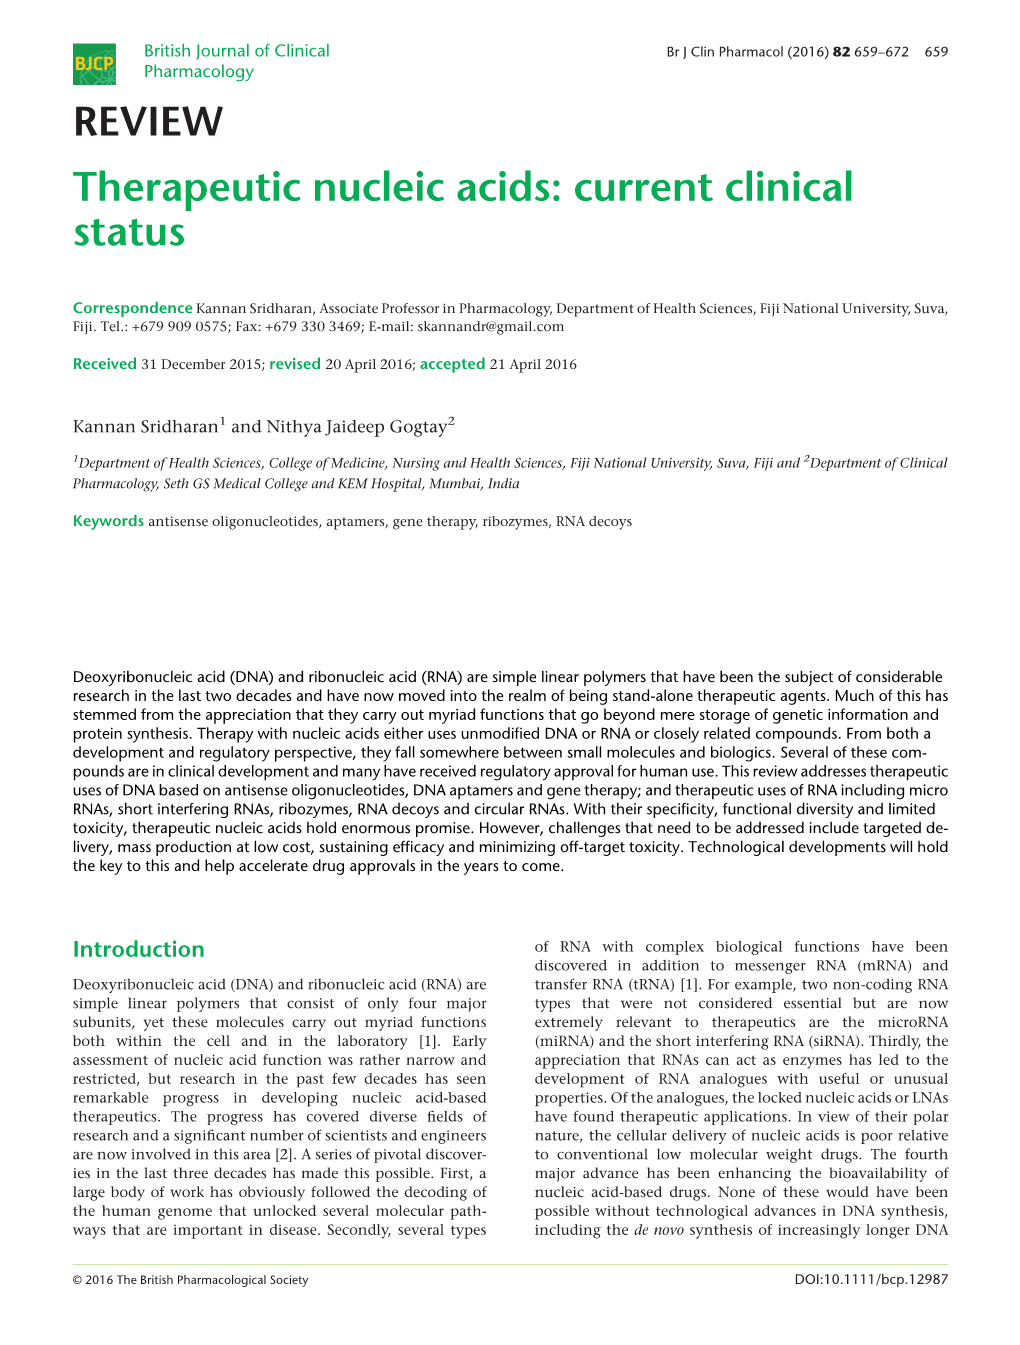 Therapeutic Nucleic Acids: Current Clinical Status